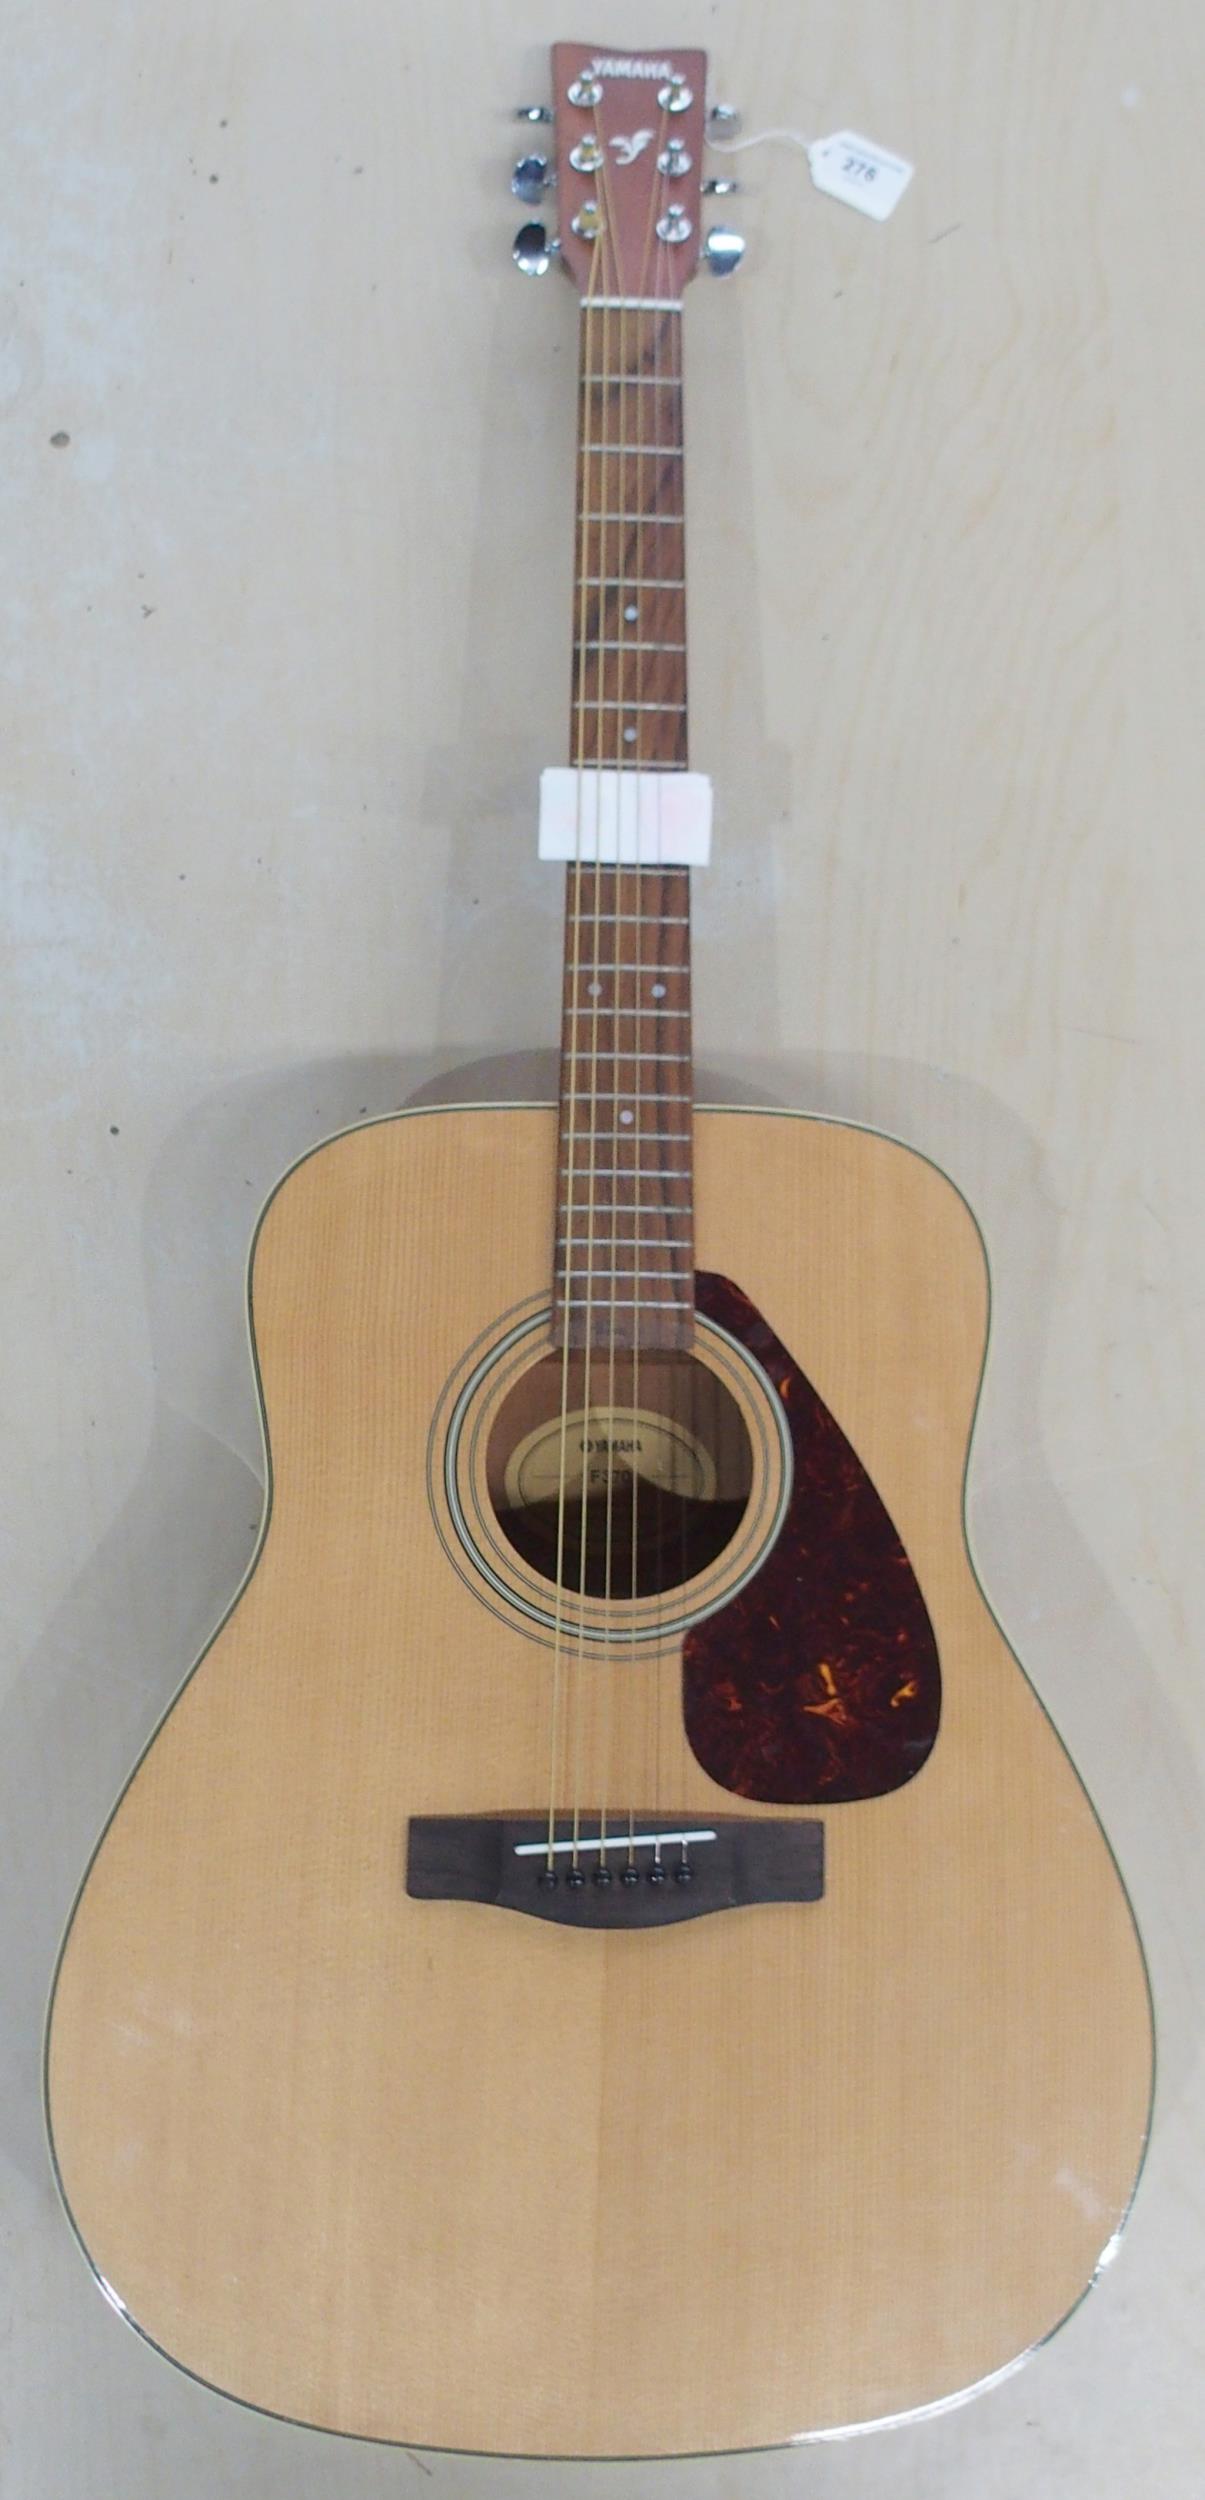 Yamaha acoustic guitar model F370 made in Indonesia  Condition Report:Available upon request